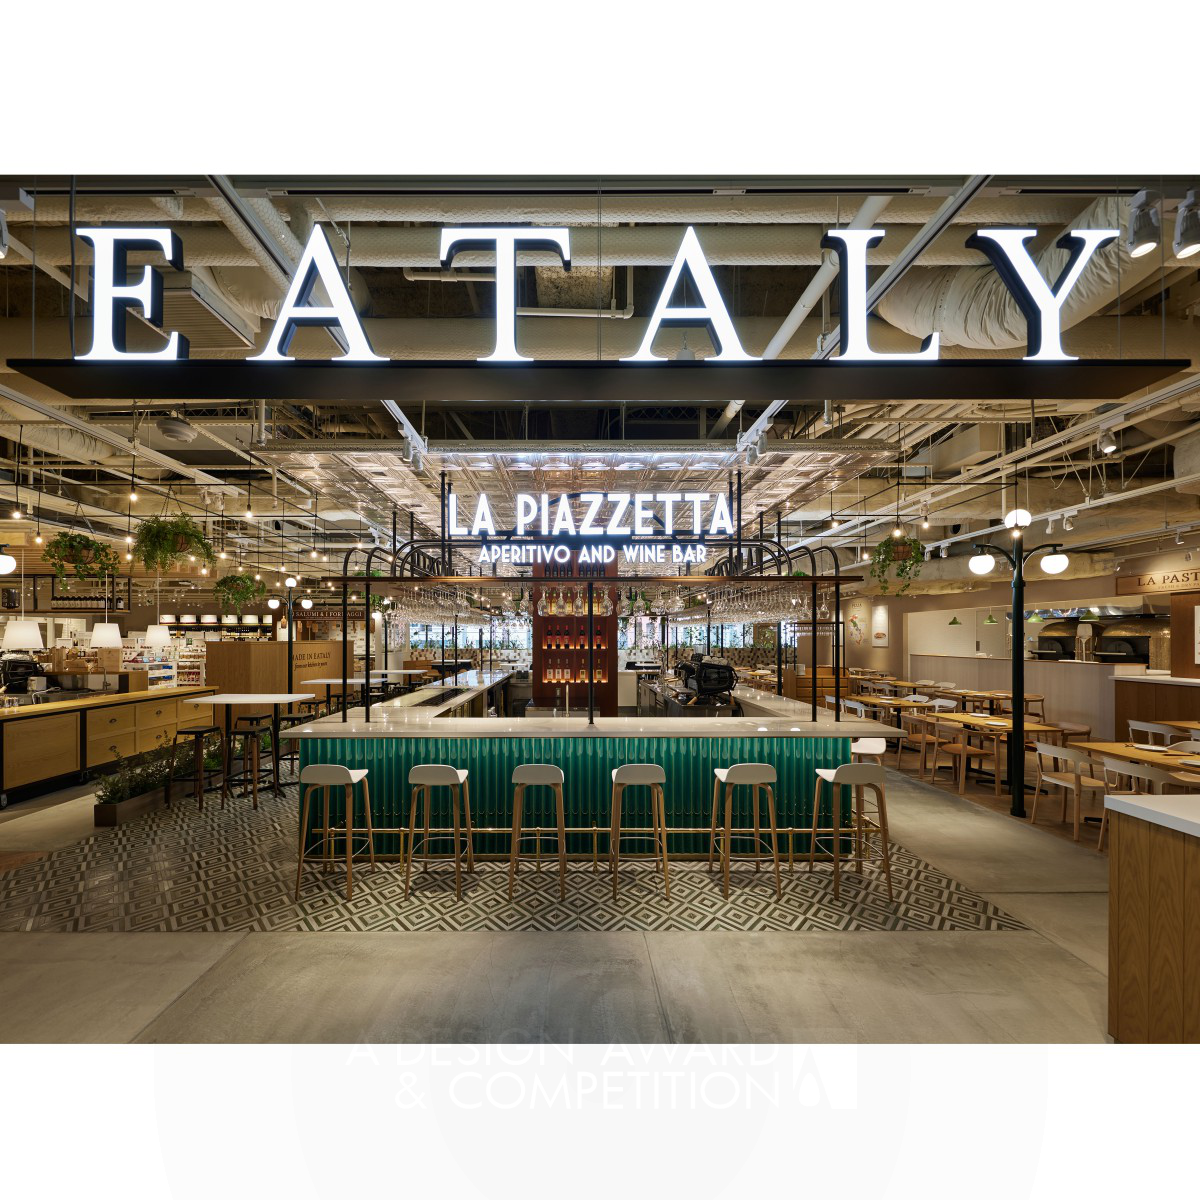 Eataly Ginza Restaurant by Uds Ltd.